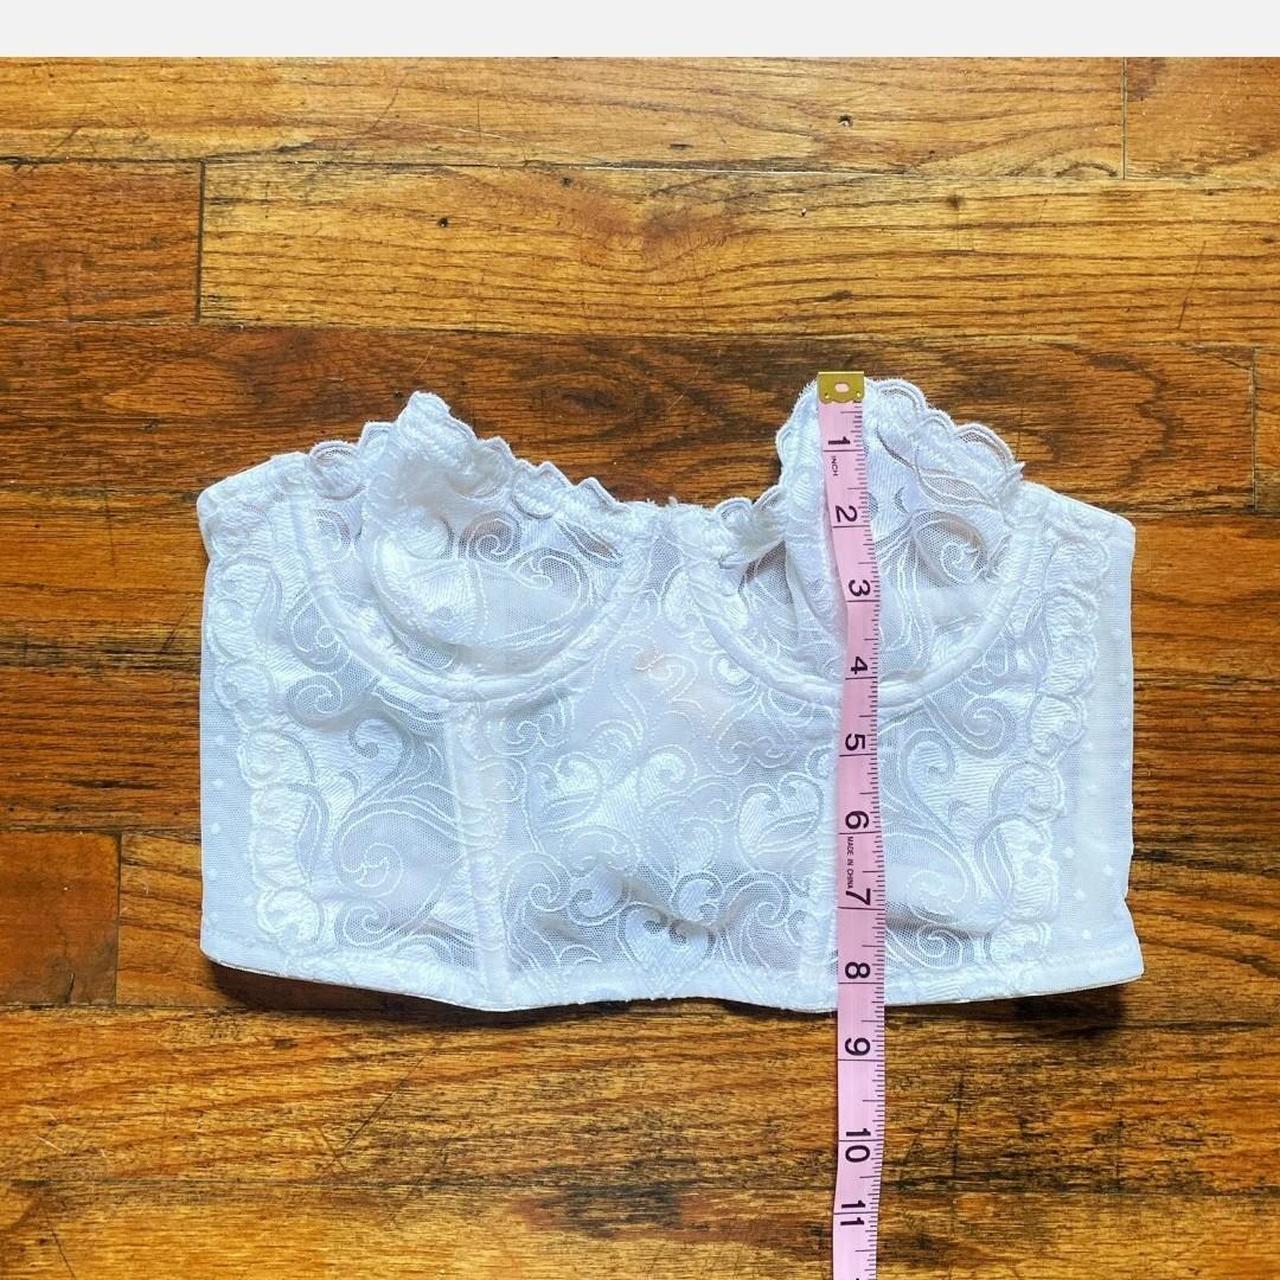 Cutest white and red cherry corset / bustier / - Depop